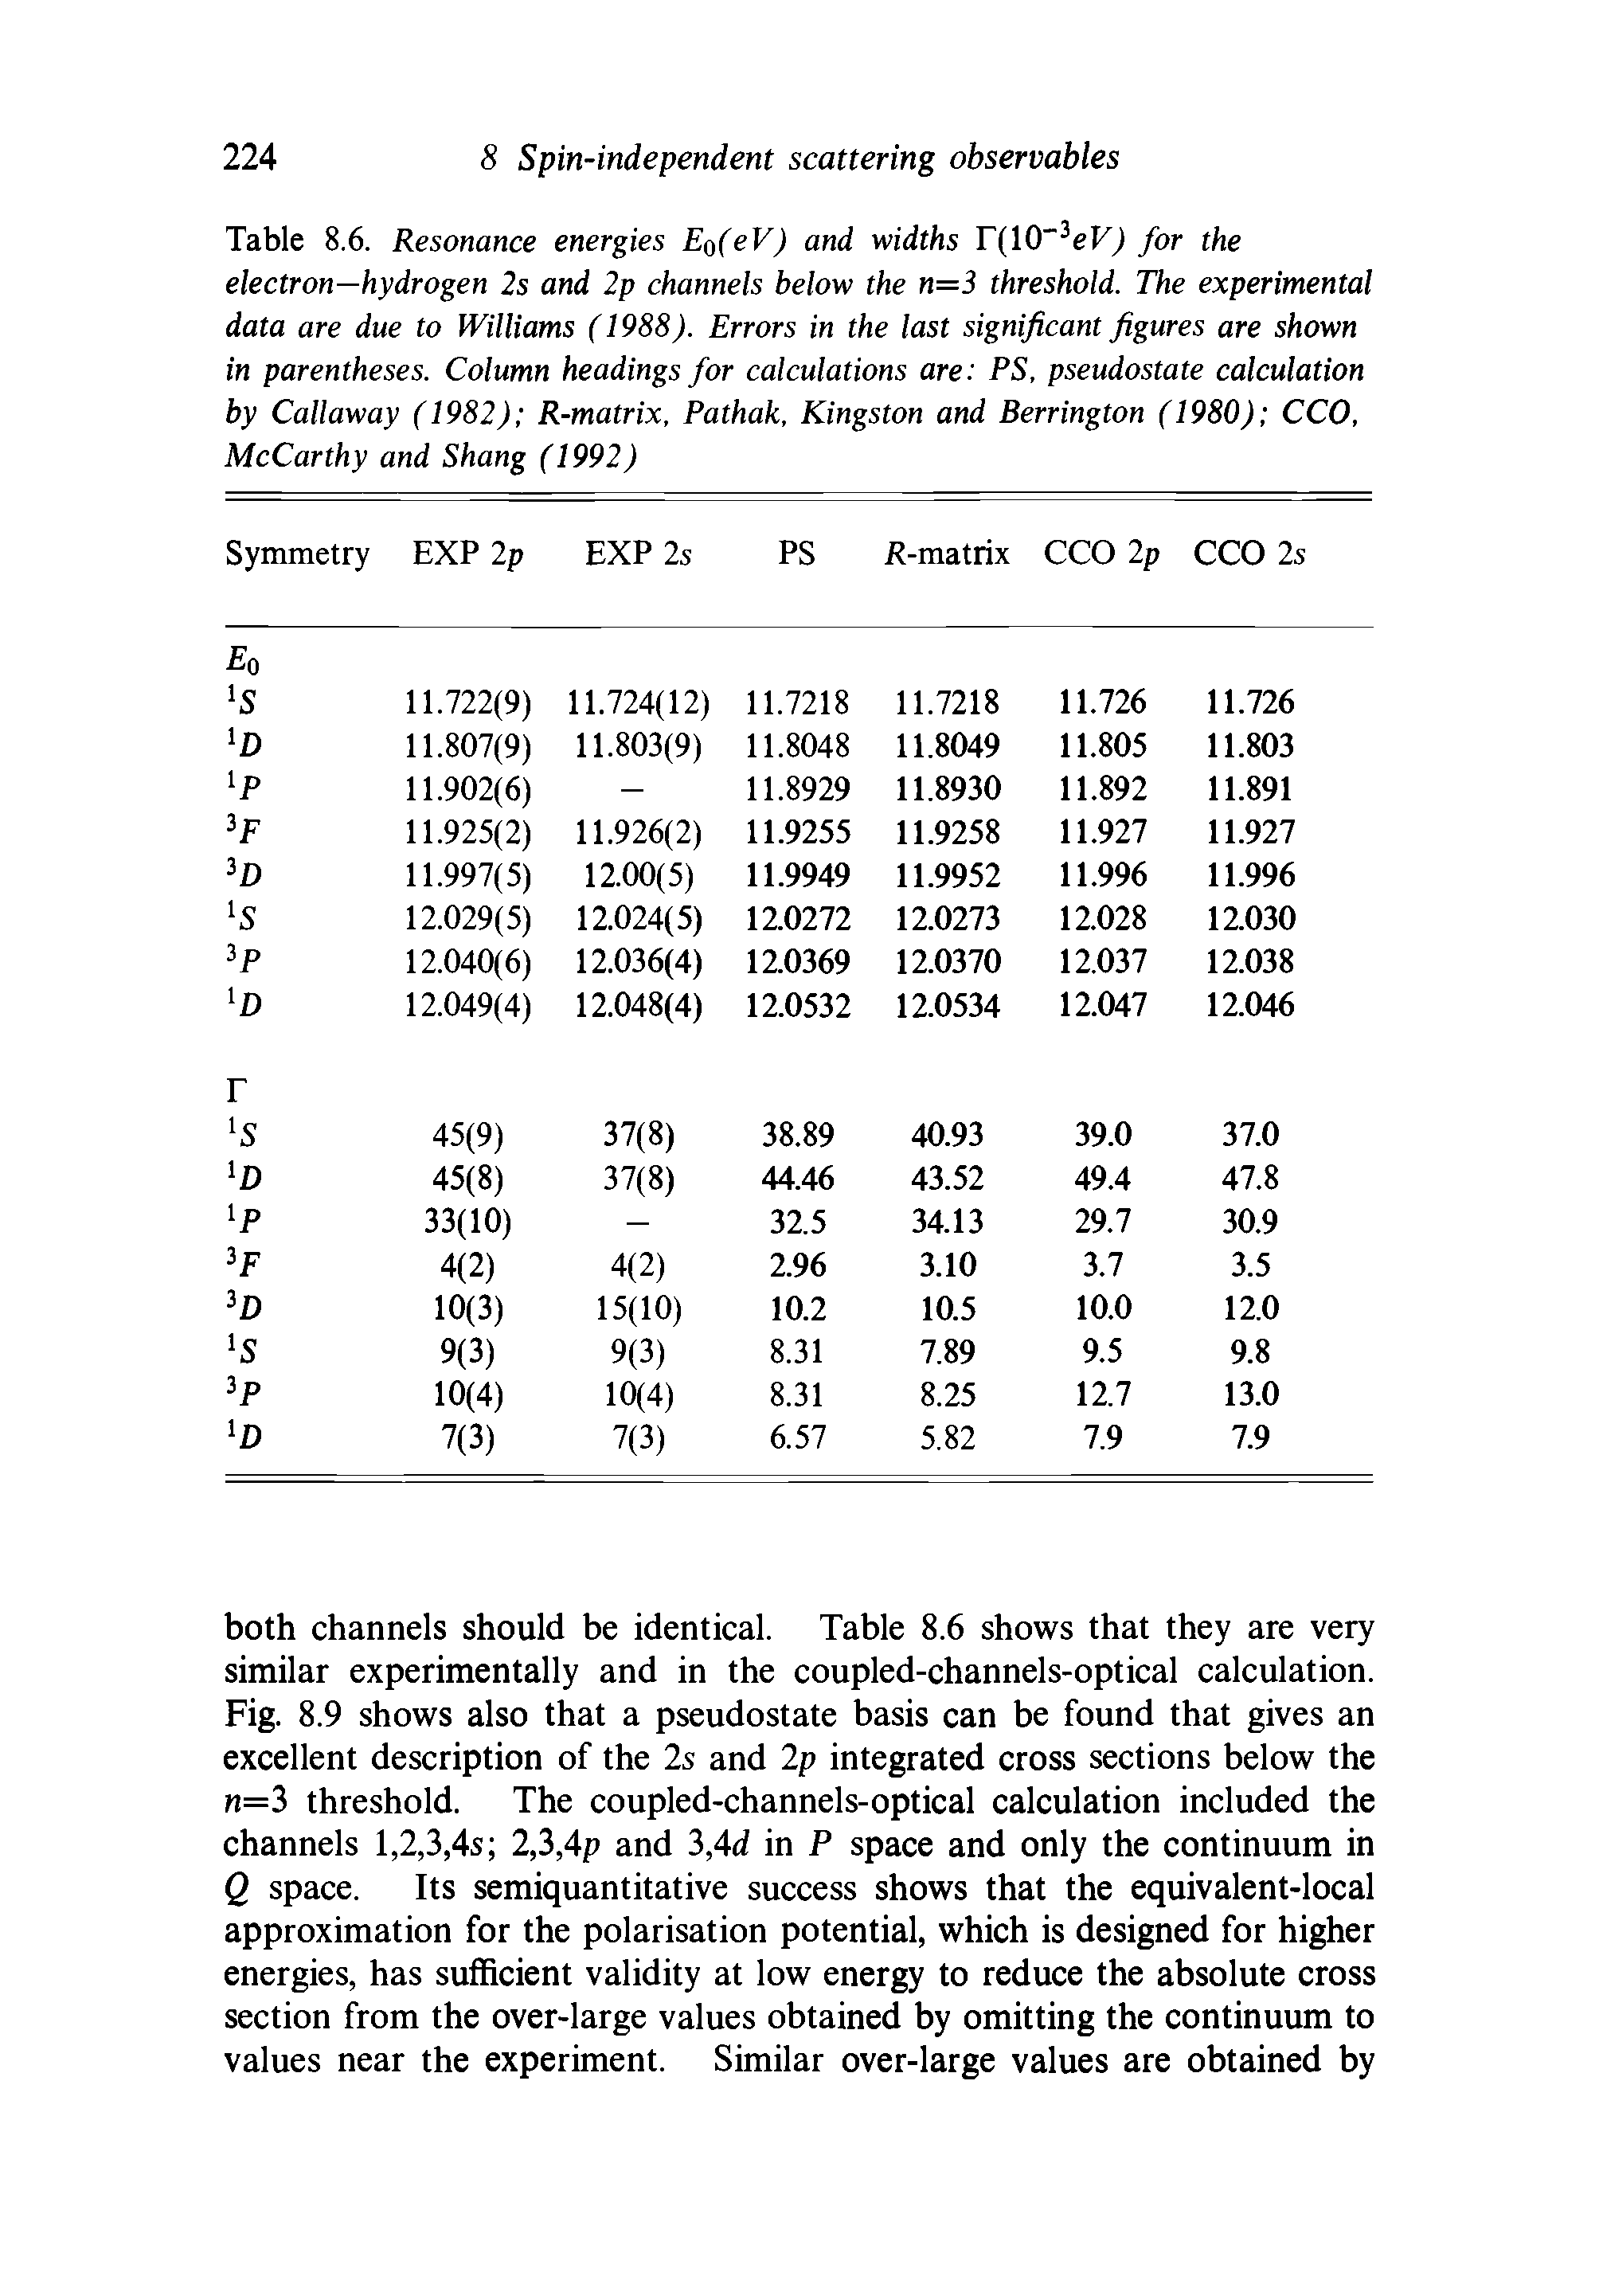 Table 8.6. Resonance energies Eo(eV) and widths r lO eV) for the electron—hydrogen 2s and 2p channels below the n=3 threshold. The experimental data are due to Williams (1988). Errors in the last significant figures are shown in parentheses. Column headings for calculations are PS, pseudostate calculation by Callaway (1982) R-matrix, Pathak, Kingston and Berrington (1980) CCO, McCarthy and Shang (1992)...